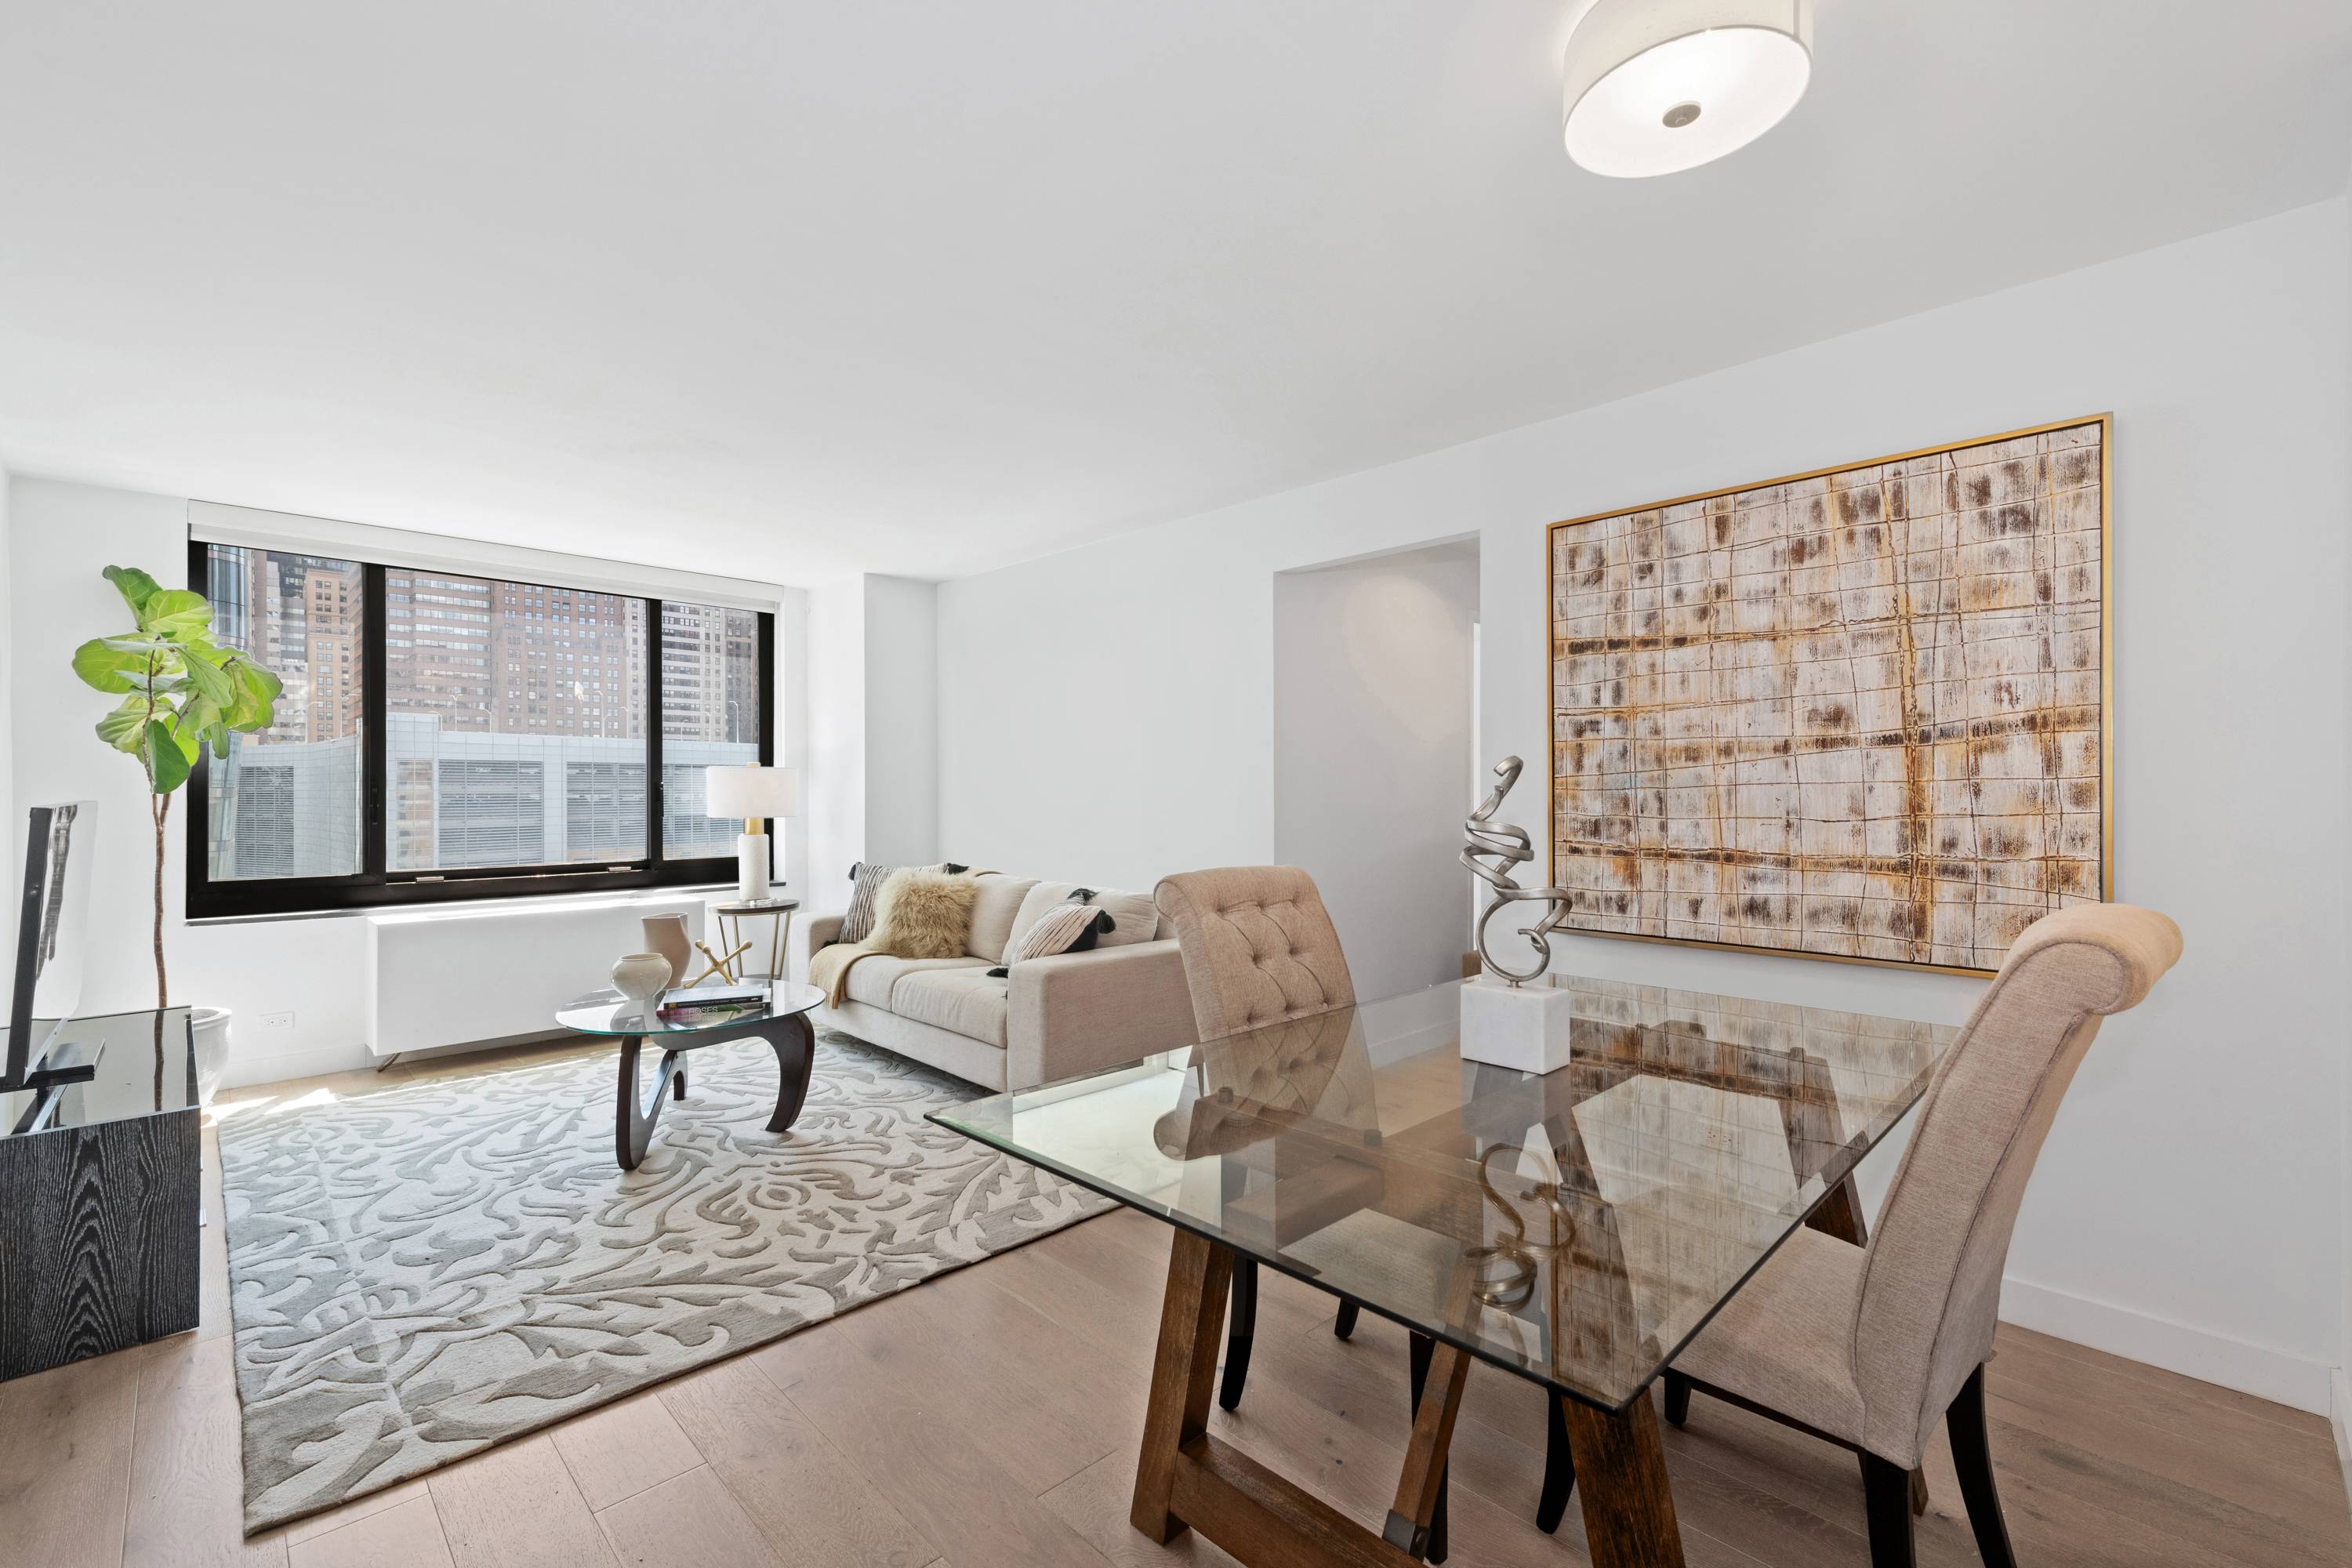 A stunning, convertible 3 bedroom, 2 bathroom gem in the heart of Battery Park City and moments away from Tribeca.